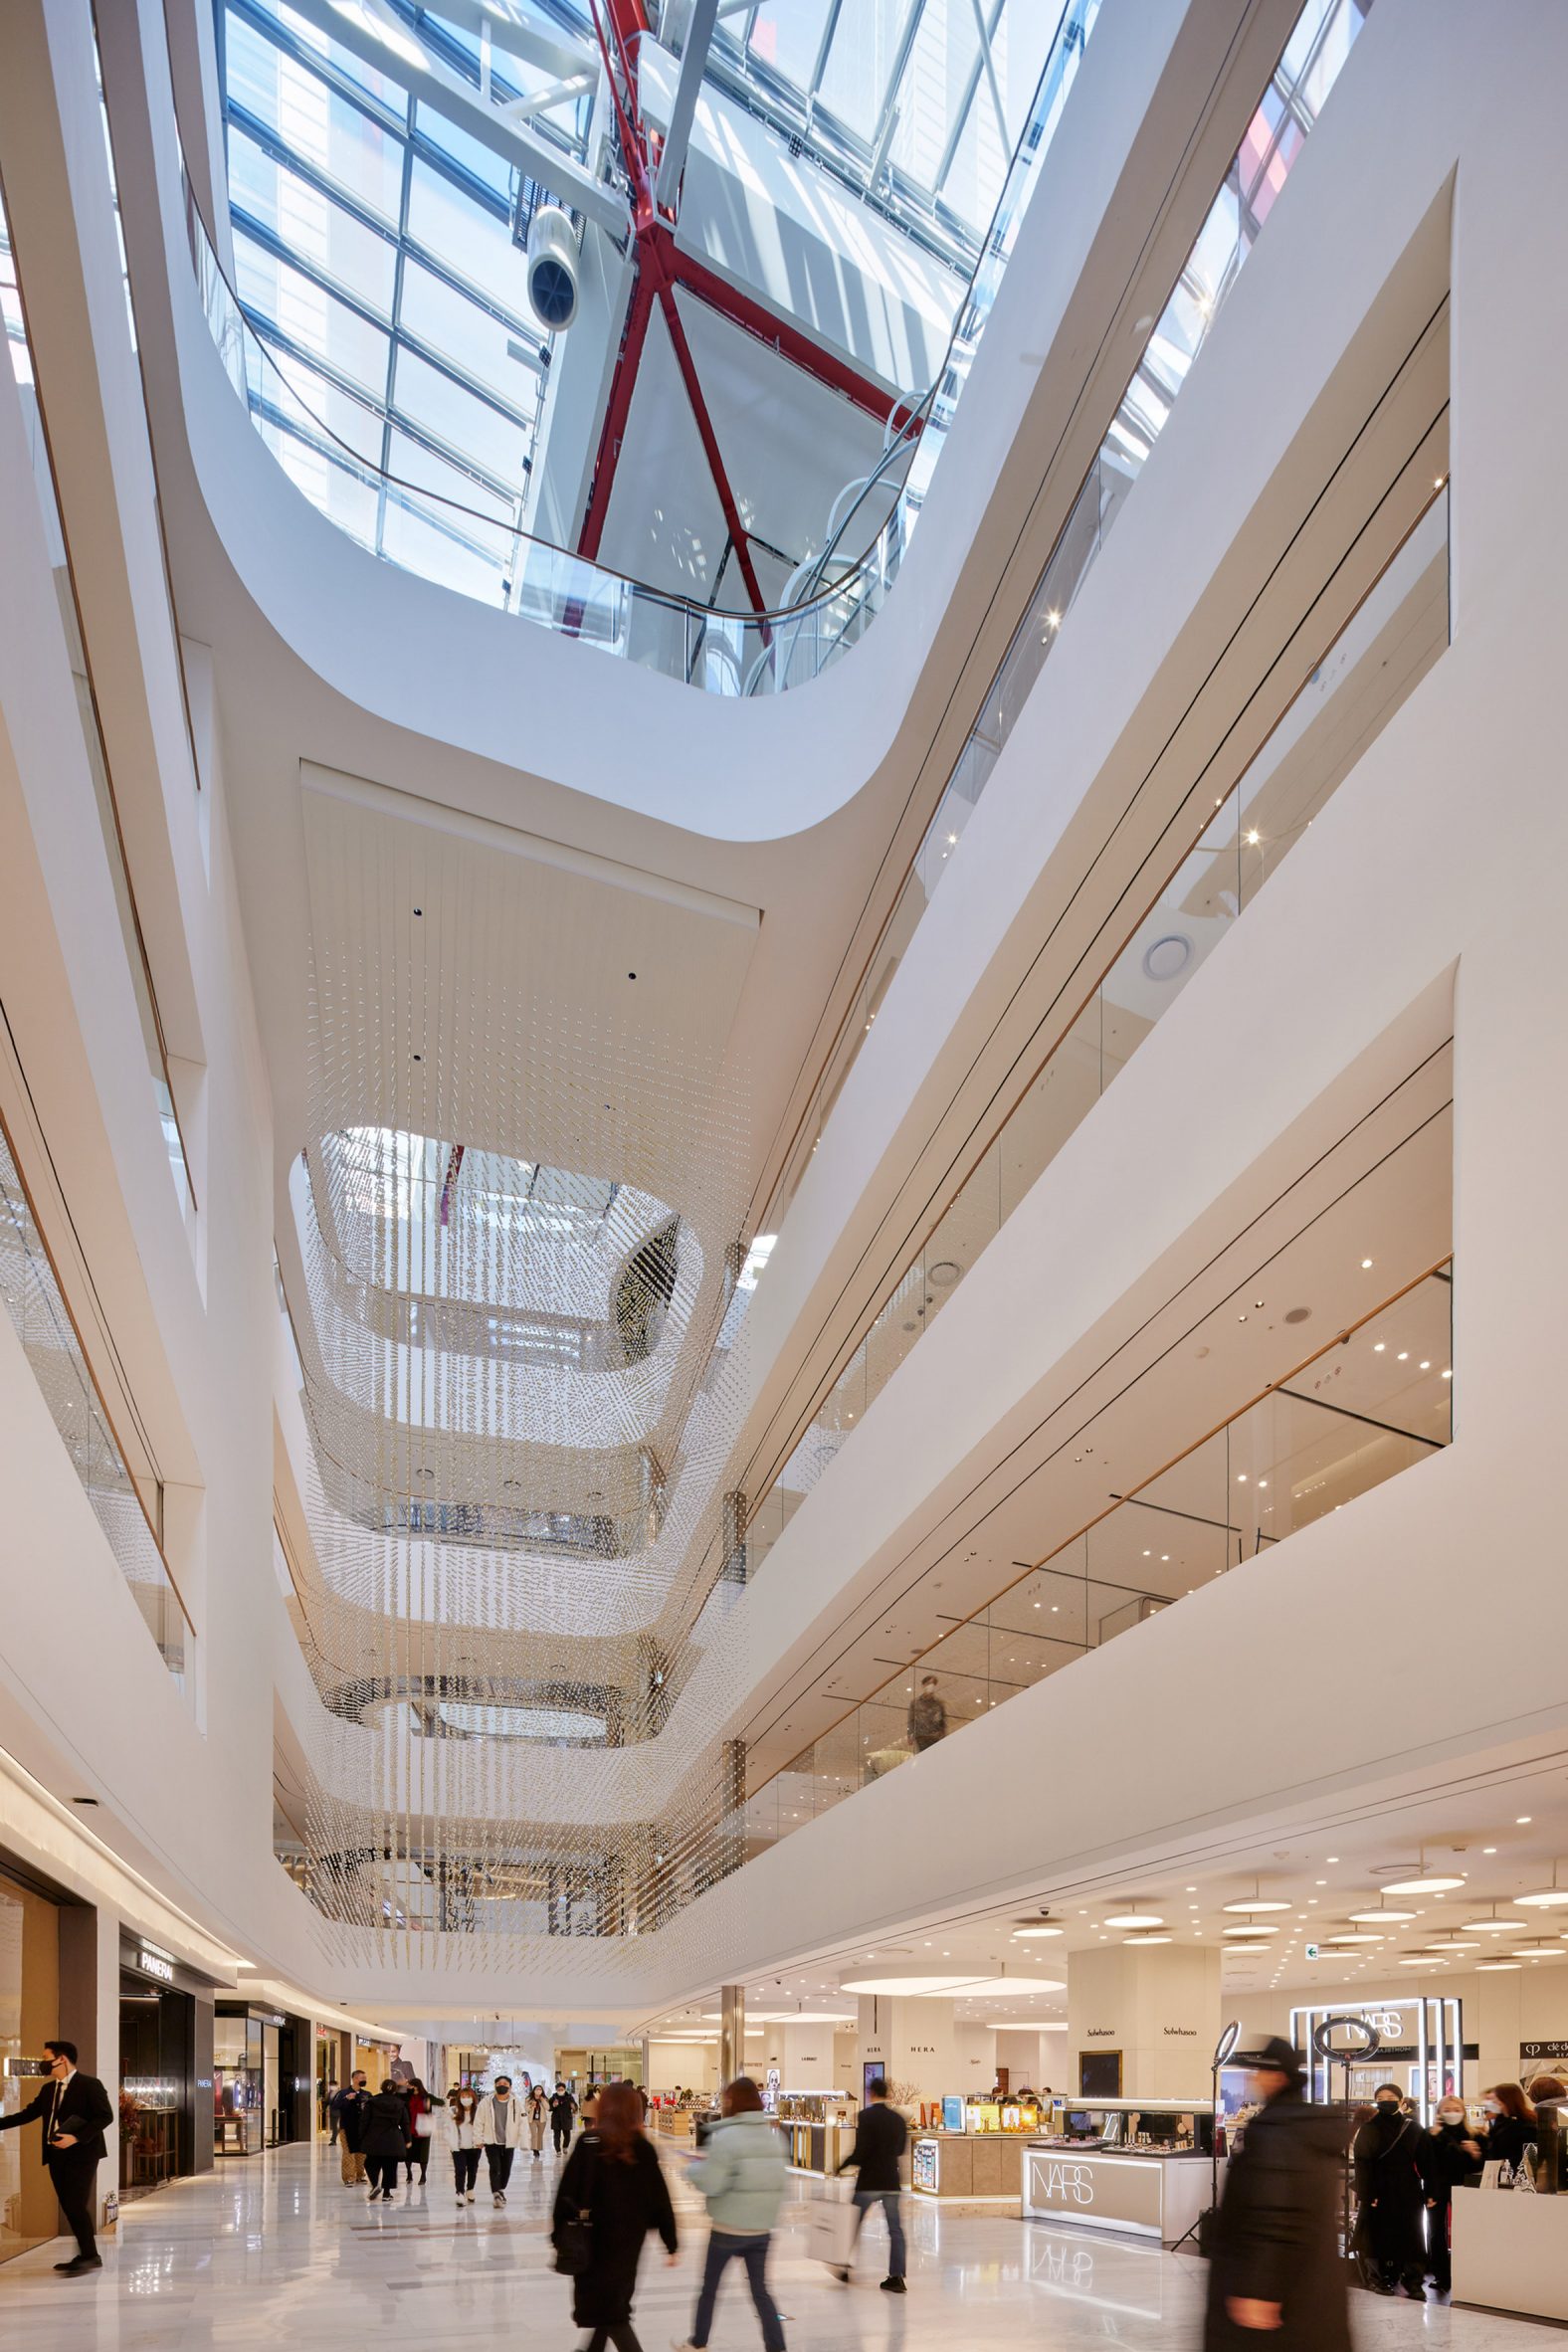 Image of an atrium in the mixed-use building